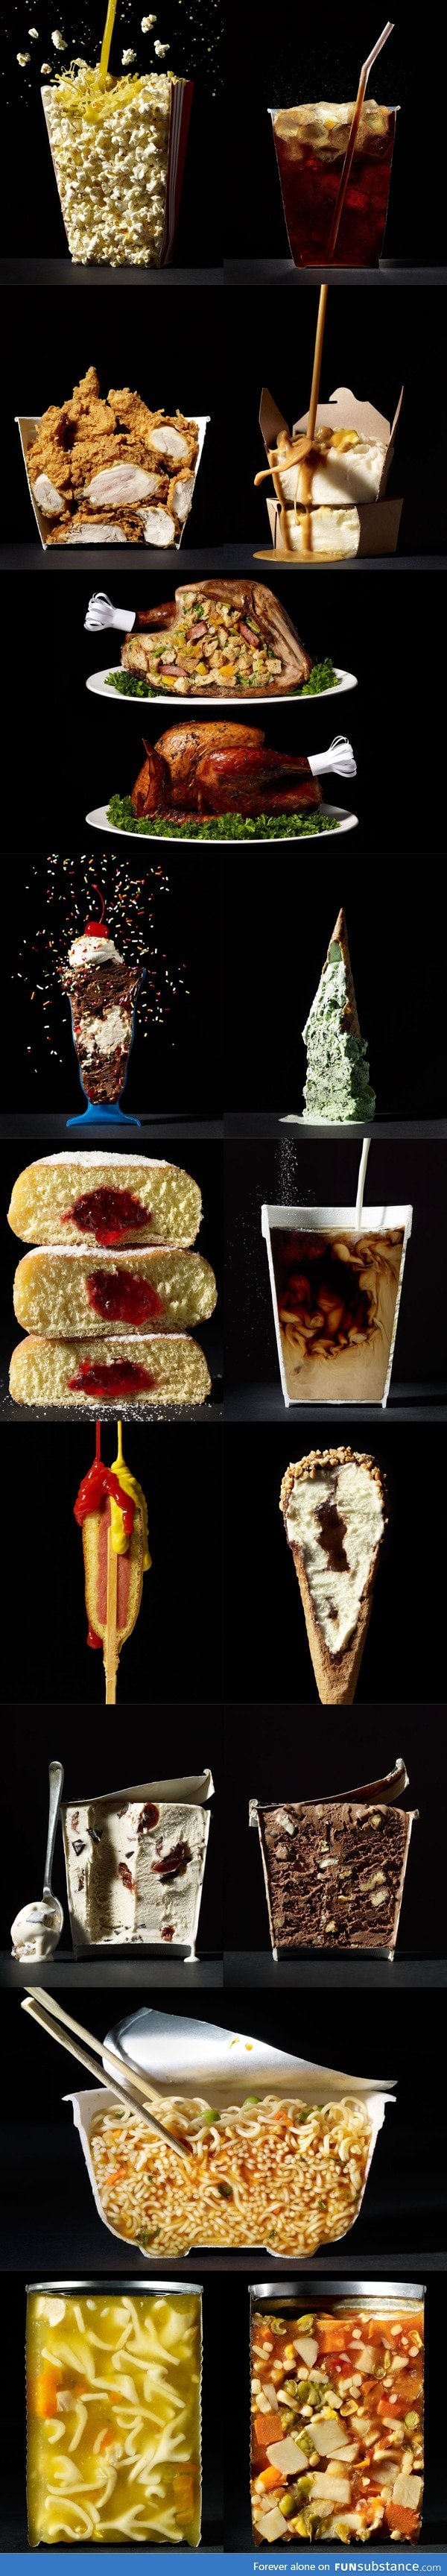 "Cut Food" - Images Of Everyday Foods Cut In Half.